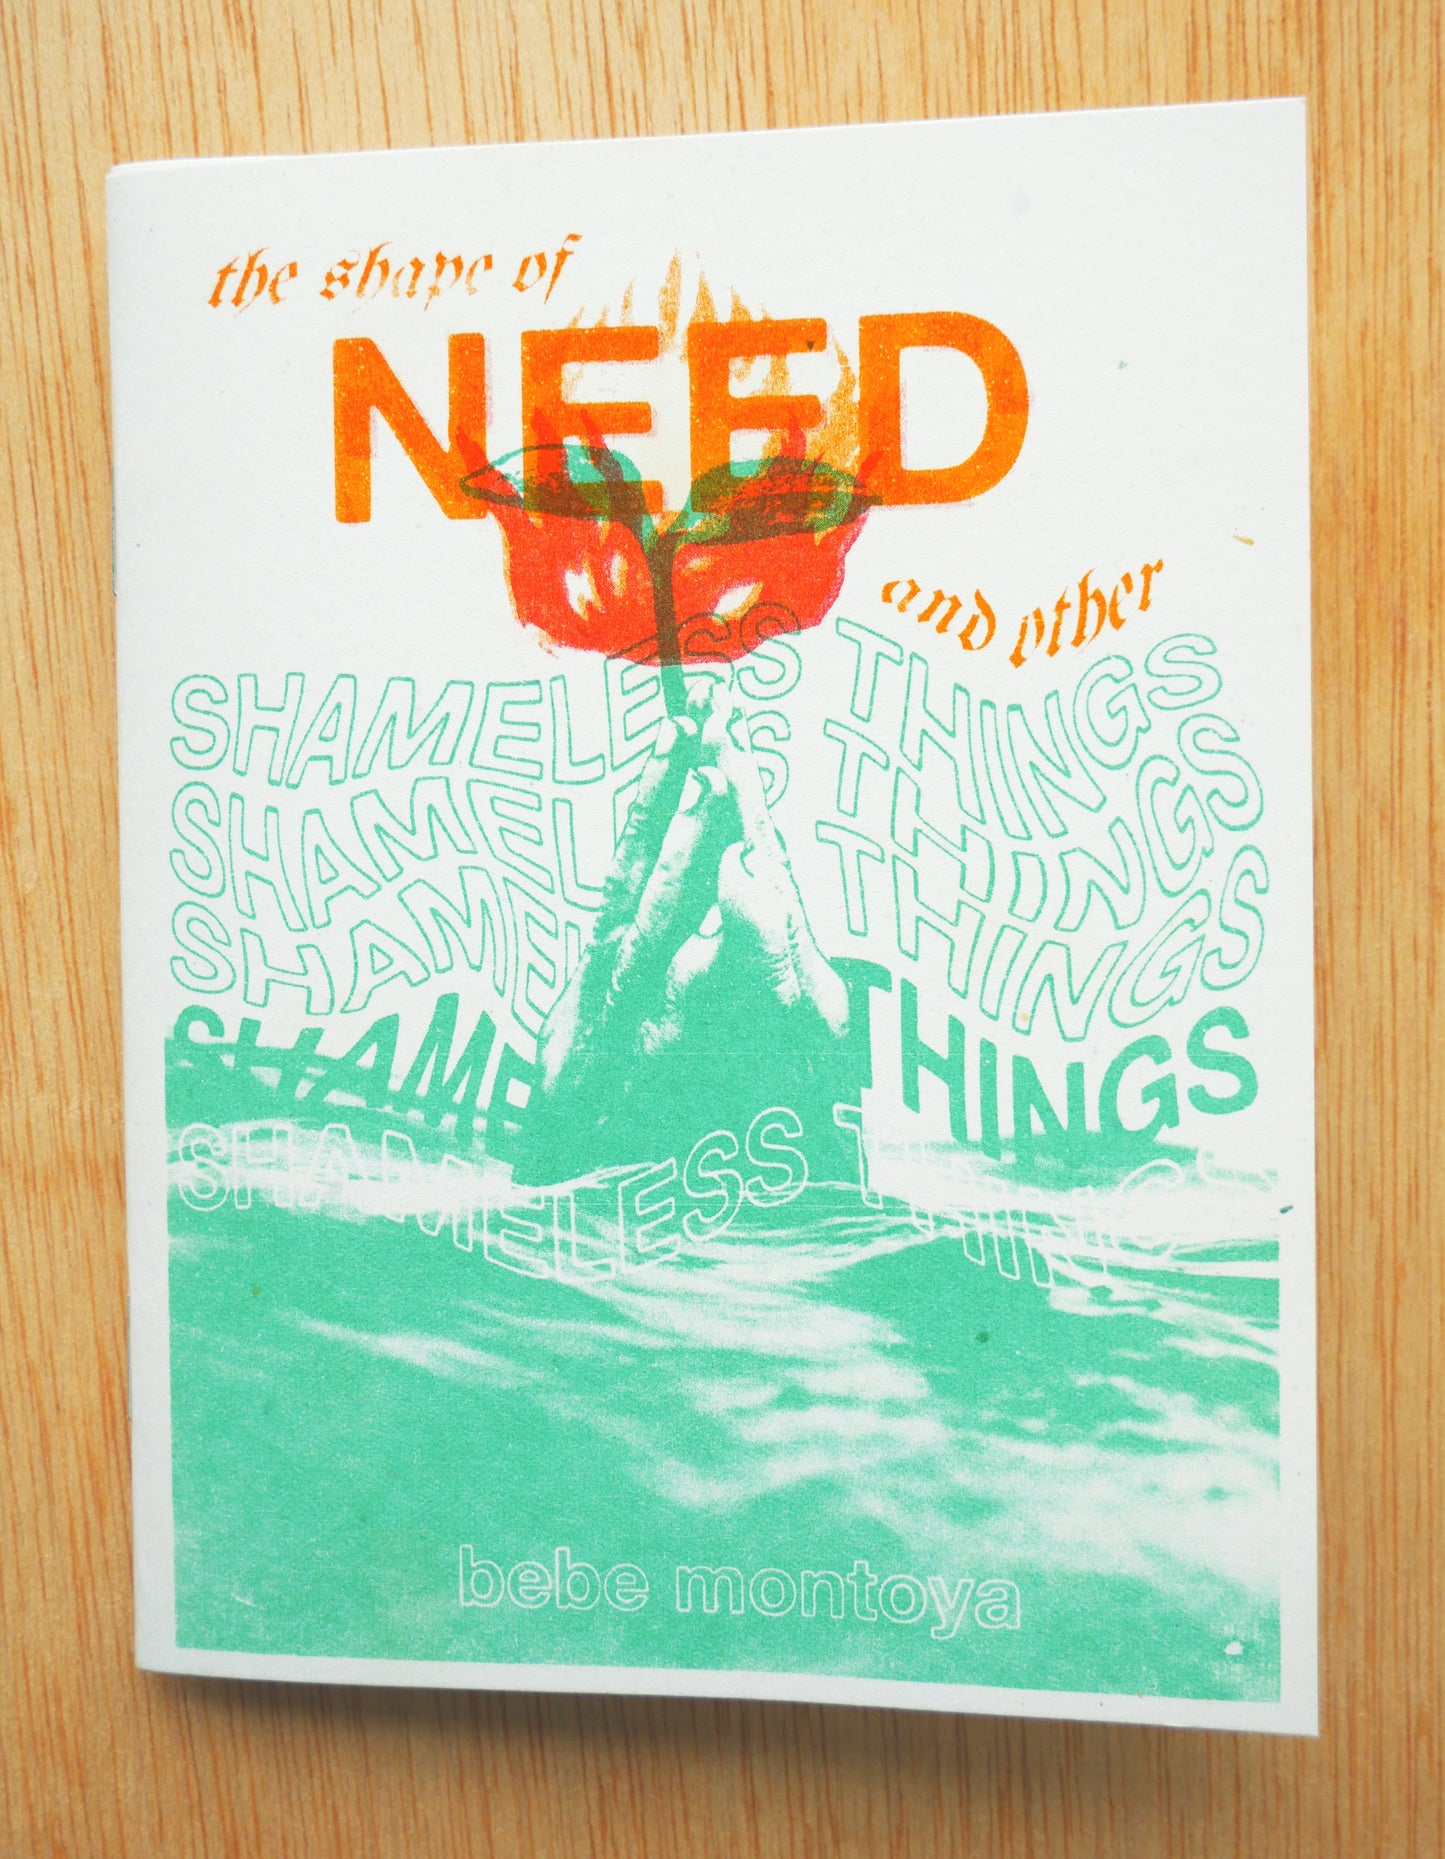 Photo of Other Shameless Things zine cover. Risograph printed by Bebe Montoya.